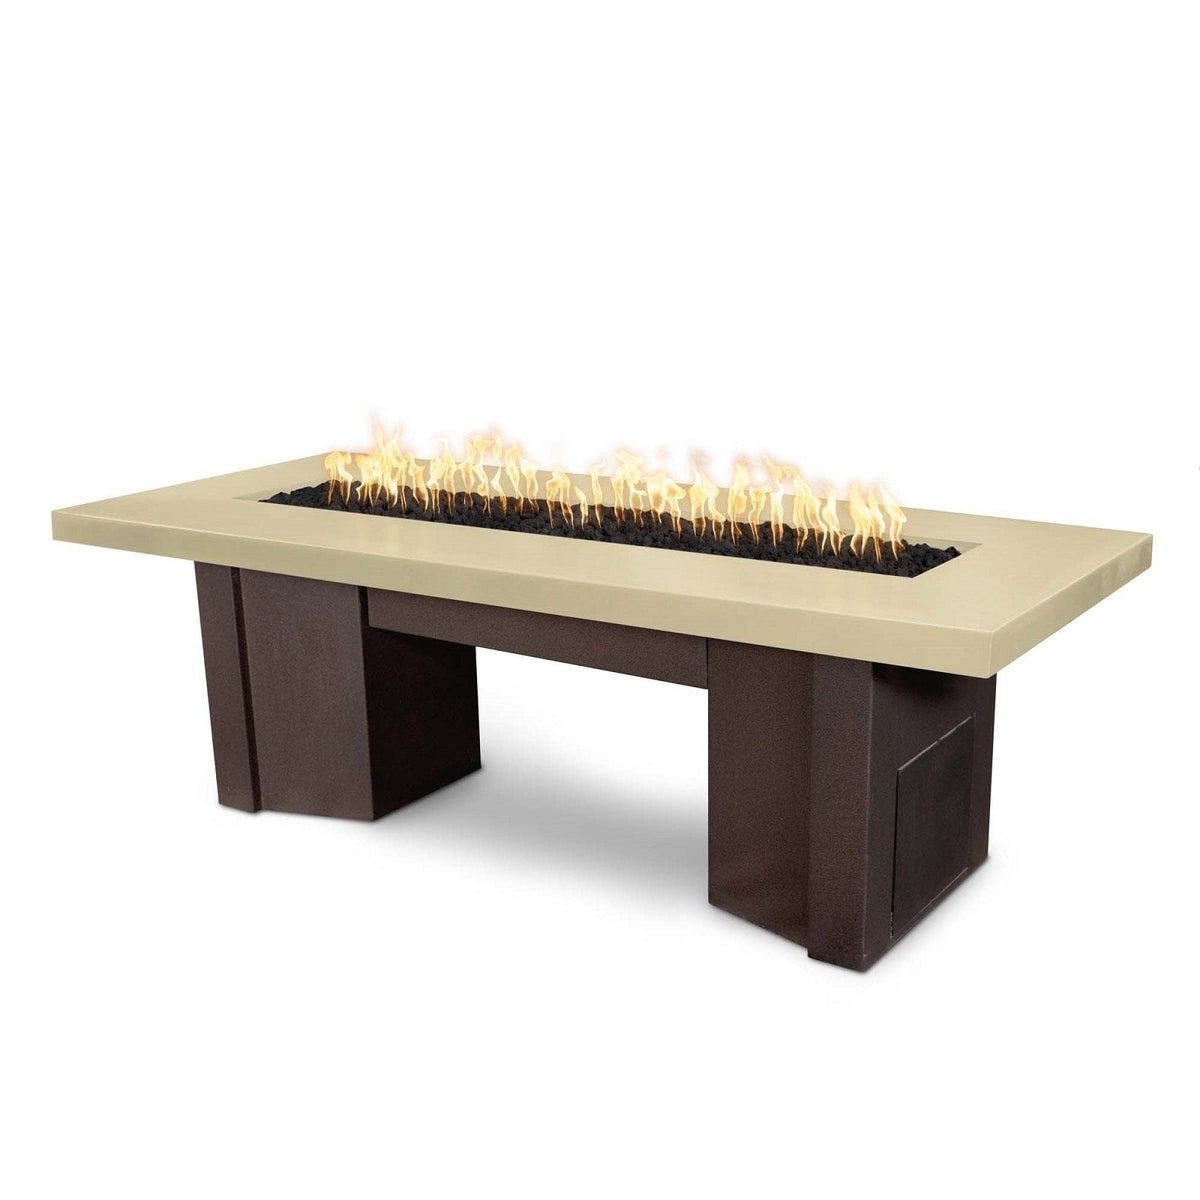 The Outdoor Plus Fire Features Vanilla (-VAN) / Java Powder Coated Steel (-JAV) The Outdoor Plus 78&quot; Alameda Fire Table Smooth Concrete in Liquid Propane - Flame Sense System with Push Button Spark Igniter / OPT-ALMGFRC78FSEN-LP